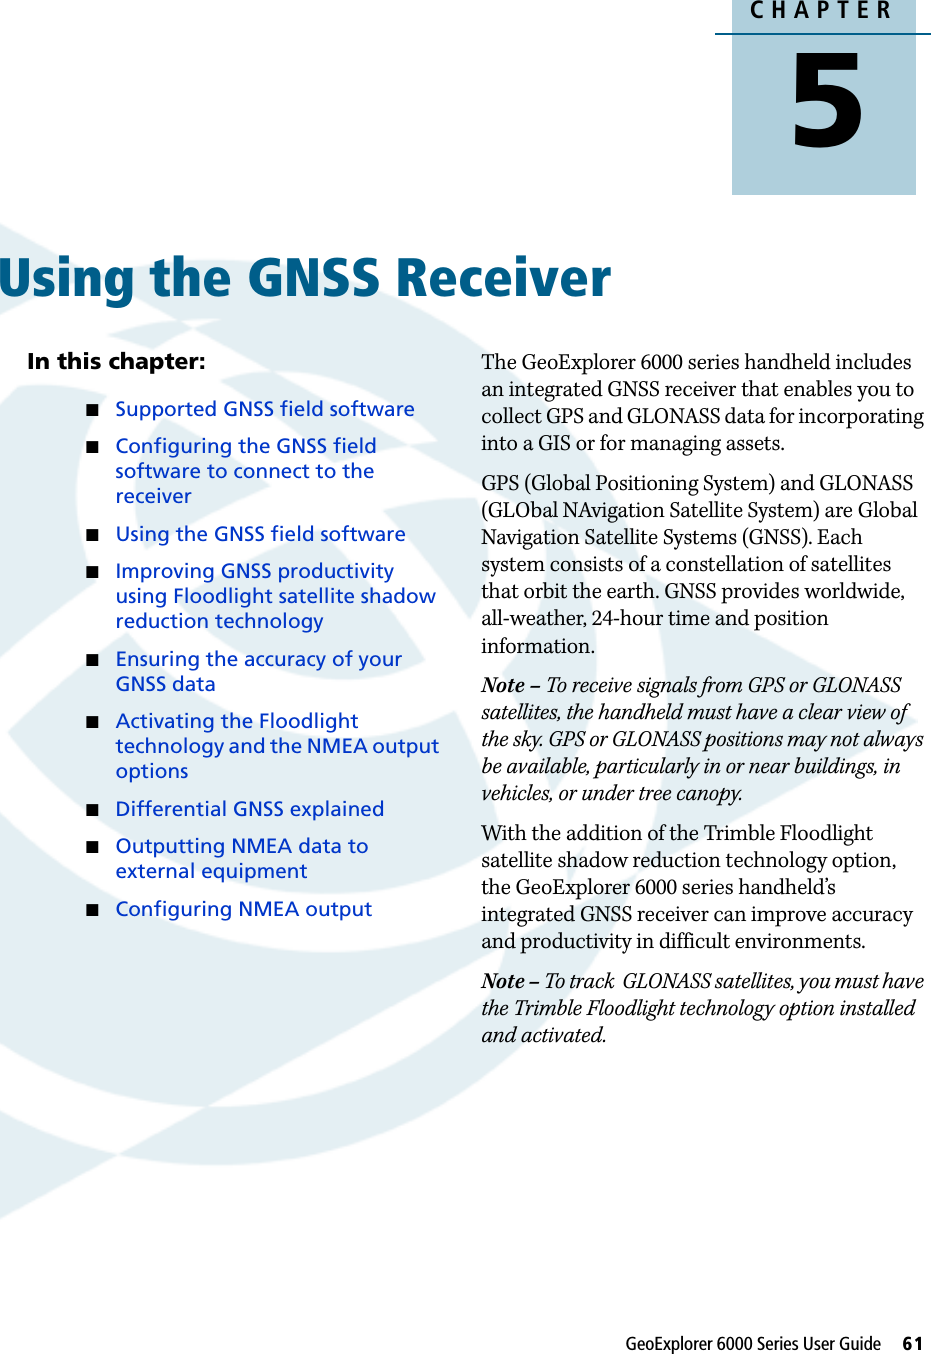 CHAPTER5GeoExplorer 6000 Series User Guide     61Using the GNSS Receiver 5In this chapter:Supported GNSS field softwareConfiguring the GNSS field software to connect to the receiverUsing the GNSS field softwareImproving GNSS productivity using Floodlight satellite shadow reduction technologyEnsuring the accuracy of your GNSS dataActivating the Floodlight technology and the NMEA output optionsDifferential GNSS explainedOutputting NMEA data to external equipmentConfiguring NMEA outputThe GeoExplorer 6000 series handheld includes an integrated GNSS receiver that enables you to collect GPS and GLONASS data for incorporating into a GIS or for managing assets.GPS (Global Positioning System) and GLONASS (GLObal NAvigation Satellite System) are Global Navigation Satellite Systems (GNSS). Each system consists of a constellation of satellites that orbit the earth. GNSS provides worldwide, all-weather, 24-hour time and position information.Note – To receive signals from GPS or GLONASS satellites, the handheld must have a clear view of the sky. GPS or GLONASS positions may not always be available, particularly in or near buildings, in vehicles, or under tree canopy.With the addition of the Trimble Floodlight satellite shadow reduction technology option, the GeoExplorer 6000 series handheld’s integrated GNSS receiver can improve accuracy and productivity in difficult environments.Note – To track  GLONASS satellites, you must have the Trimble Floodlight technology option installed and activated.